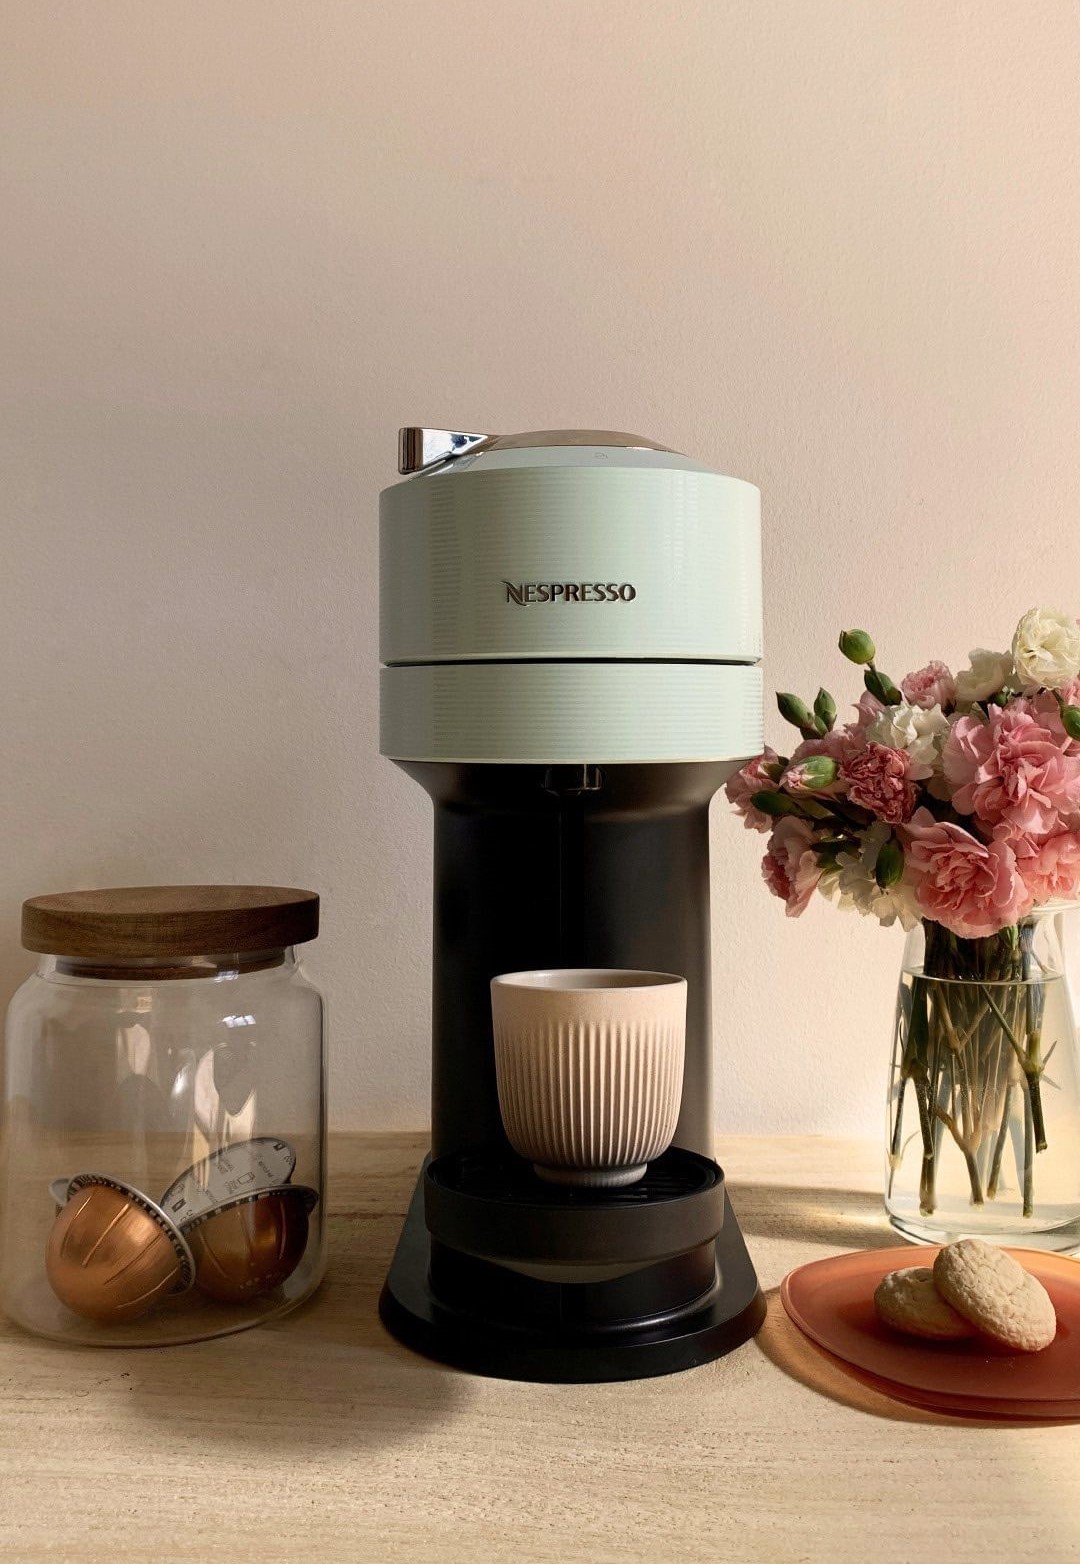 lifestyle image of a nespresso virtuo machine. to its right is a jar with nespresso pods and to the right there are pink and white florals and a plate with two cookies